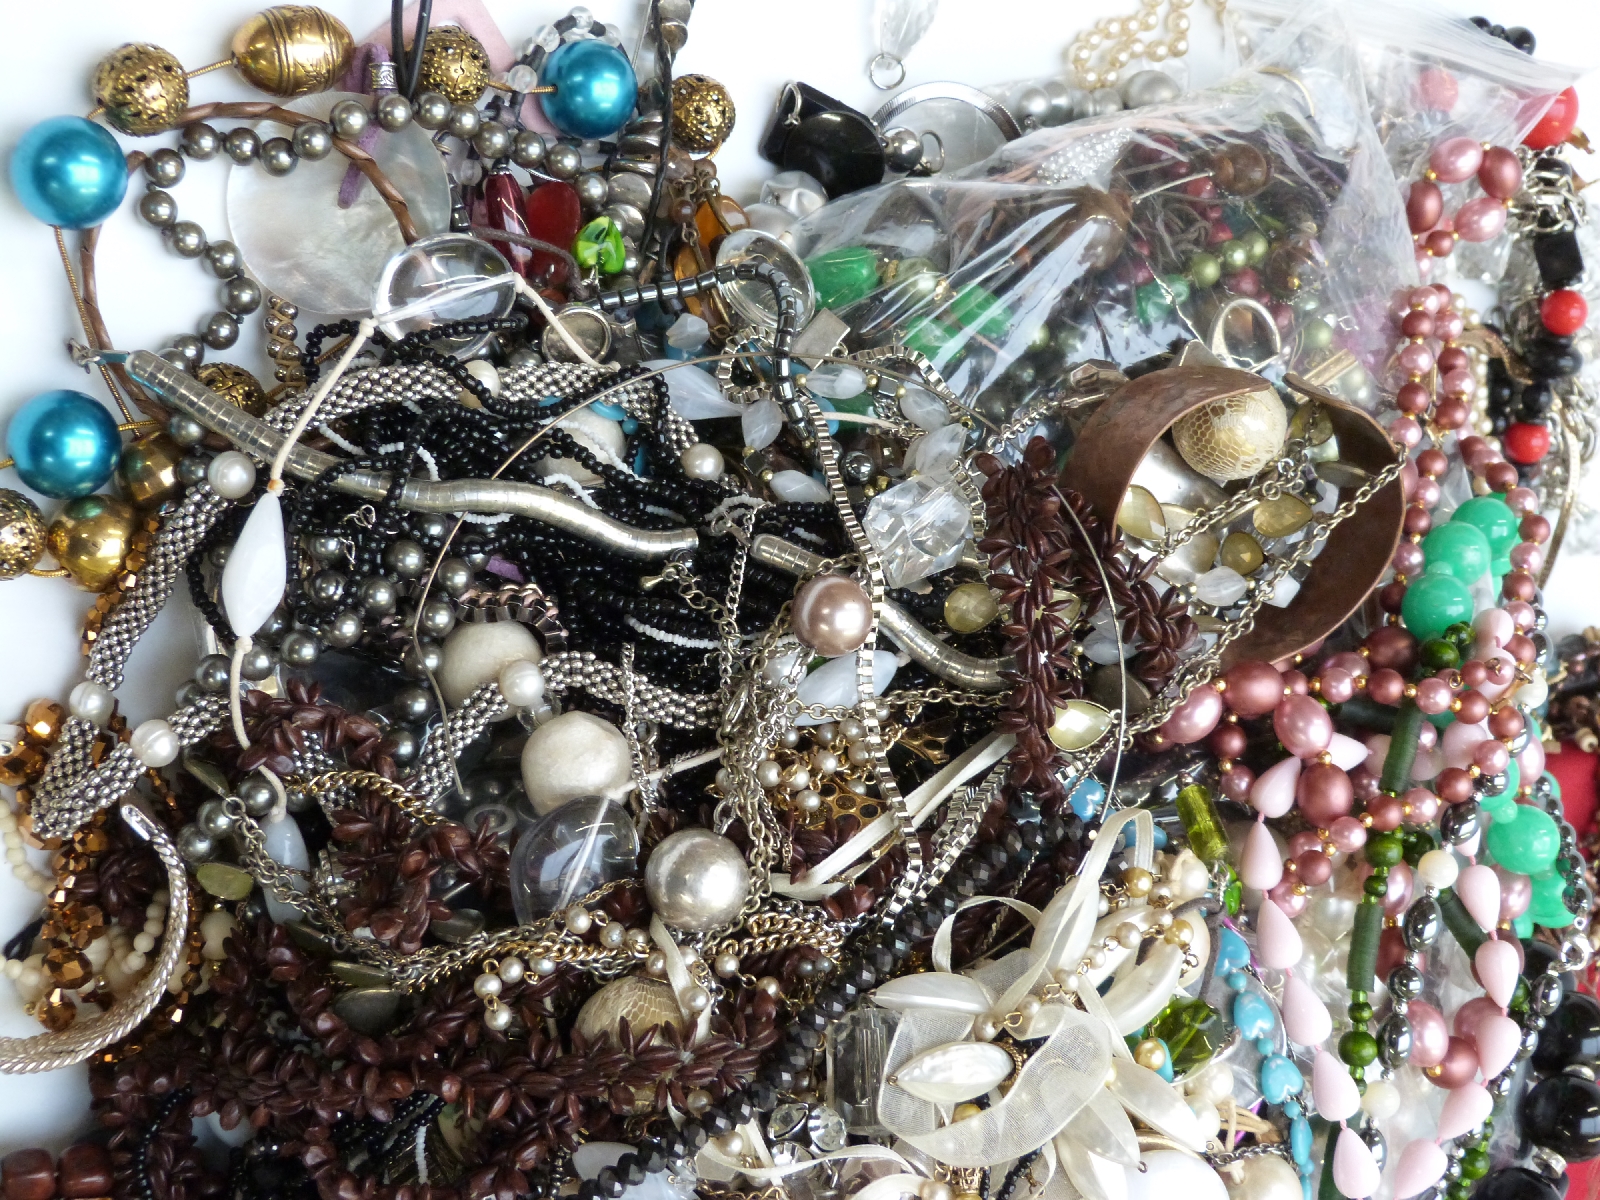 A collection of jewellery including necklaces, brooches, earrings etc - Image 2 of 2